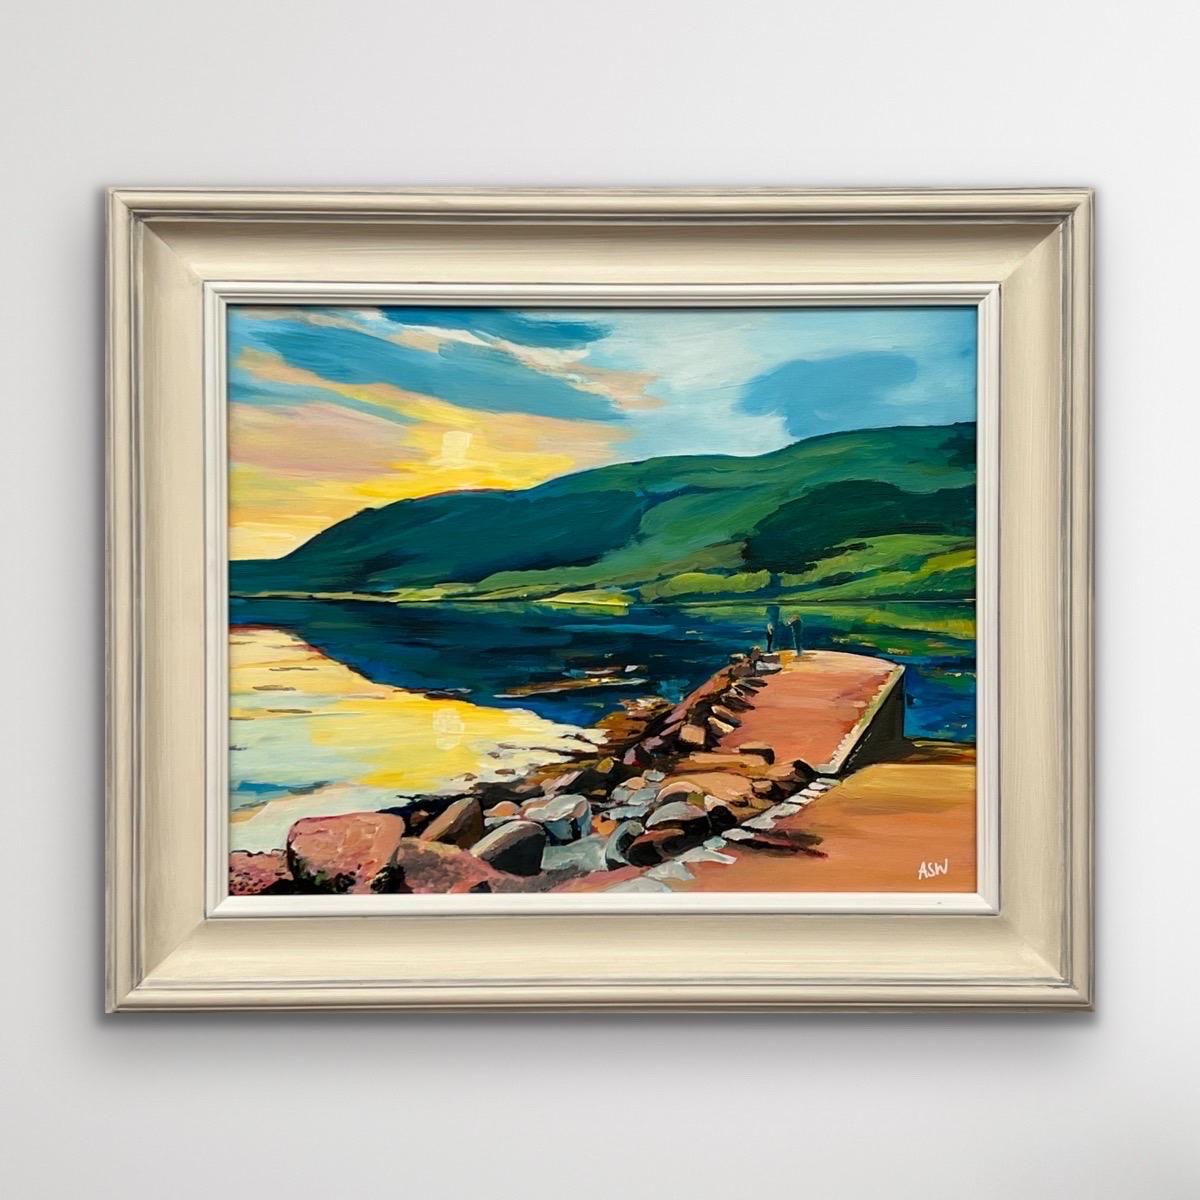 Sunset at Loch in the Mountains of the Scottish Highlands by Contemporary Artist - Painting by Angela Wakefield